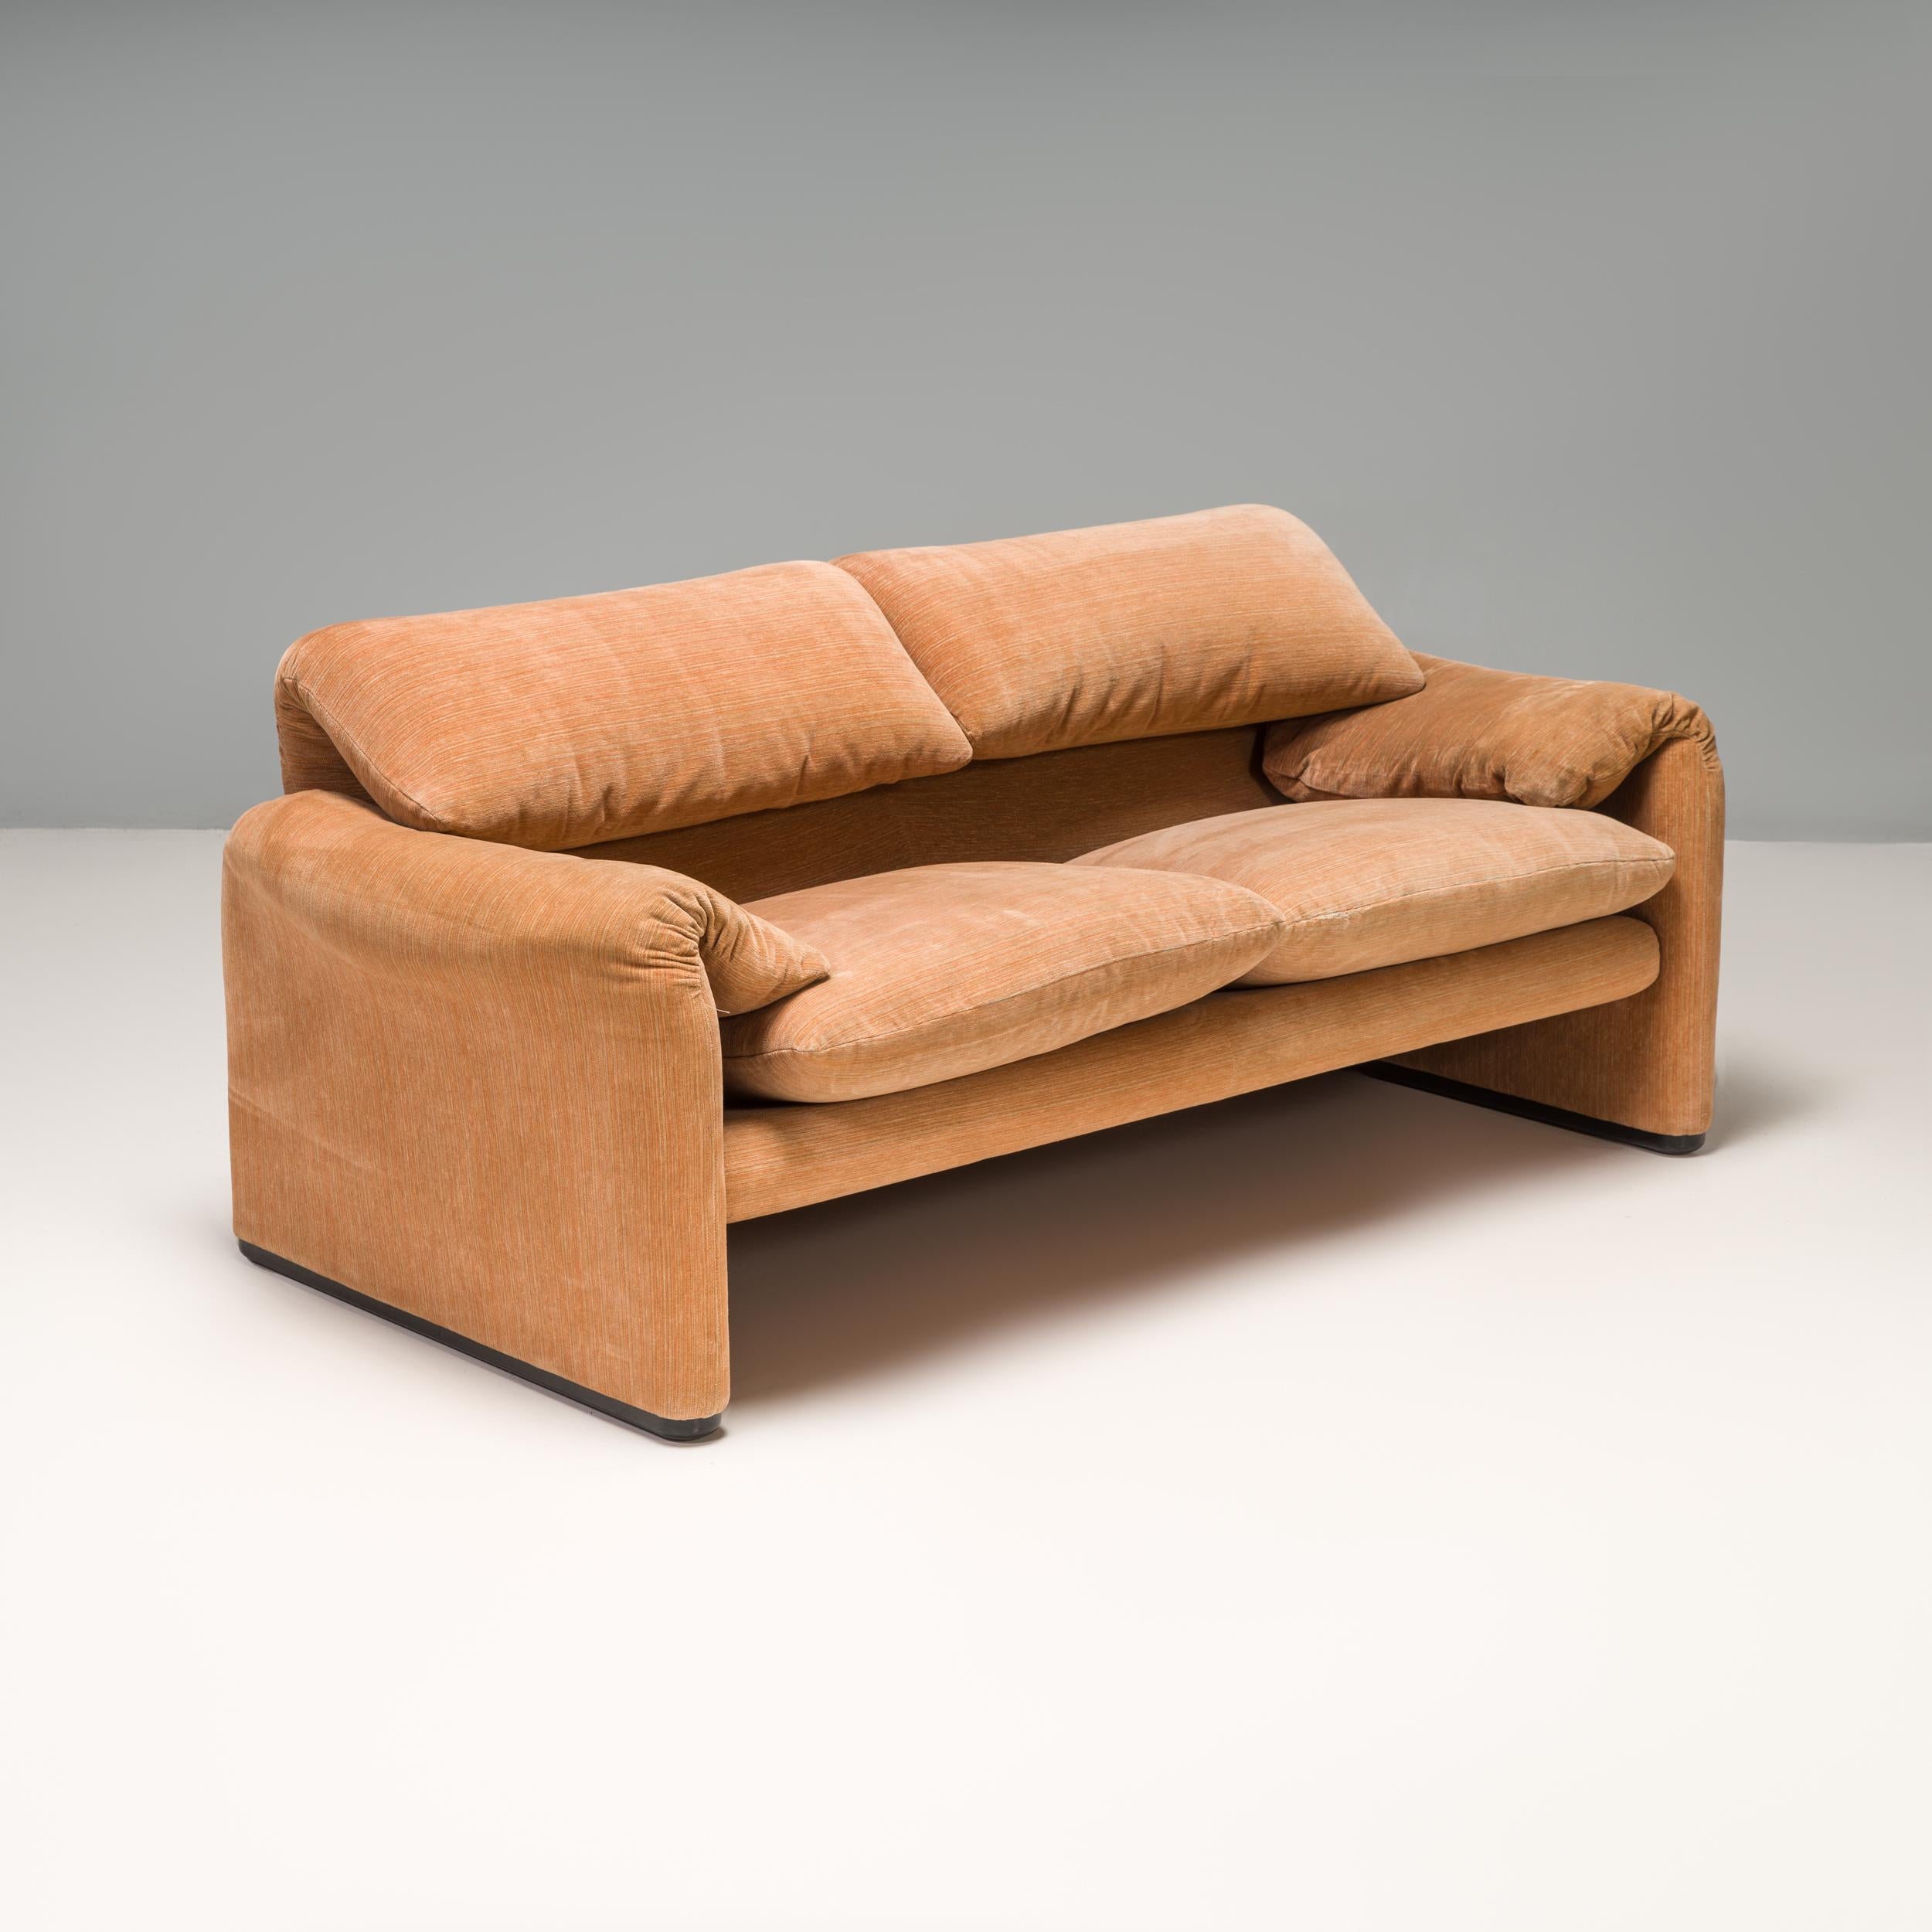 Originally designed by Vico Magistretti for Cassina in 1973, the Maralunga sofa has become a true design icon.
Upholstered in soft textured tan fabric, the sofa features the signature adjustable headrests and folded armrests, while two separate seat